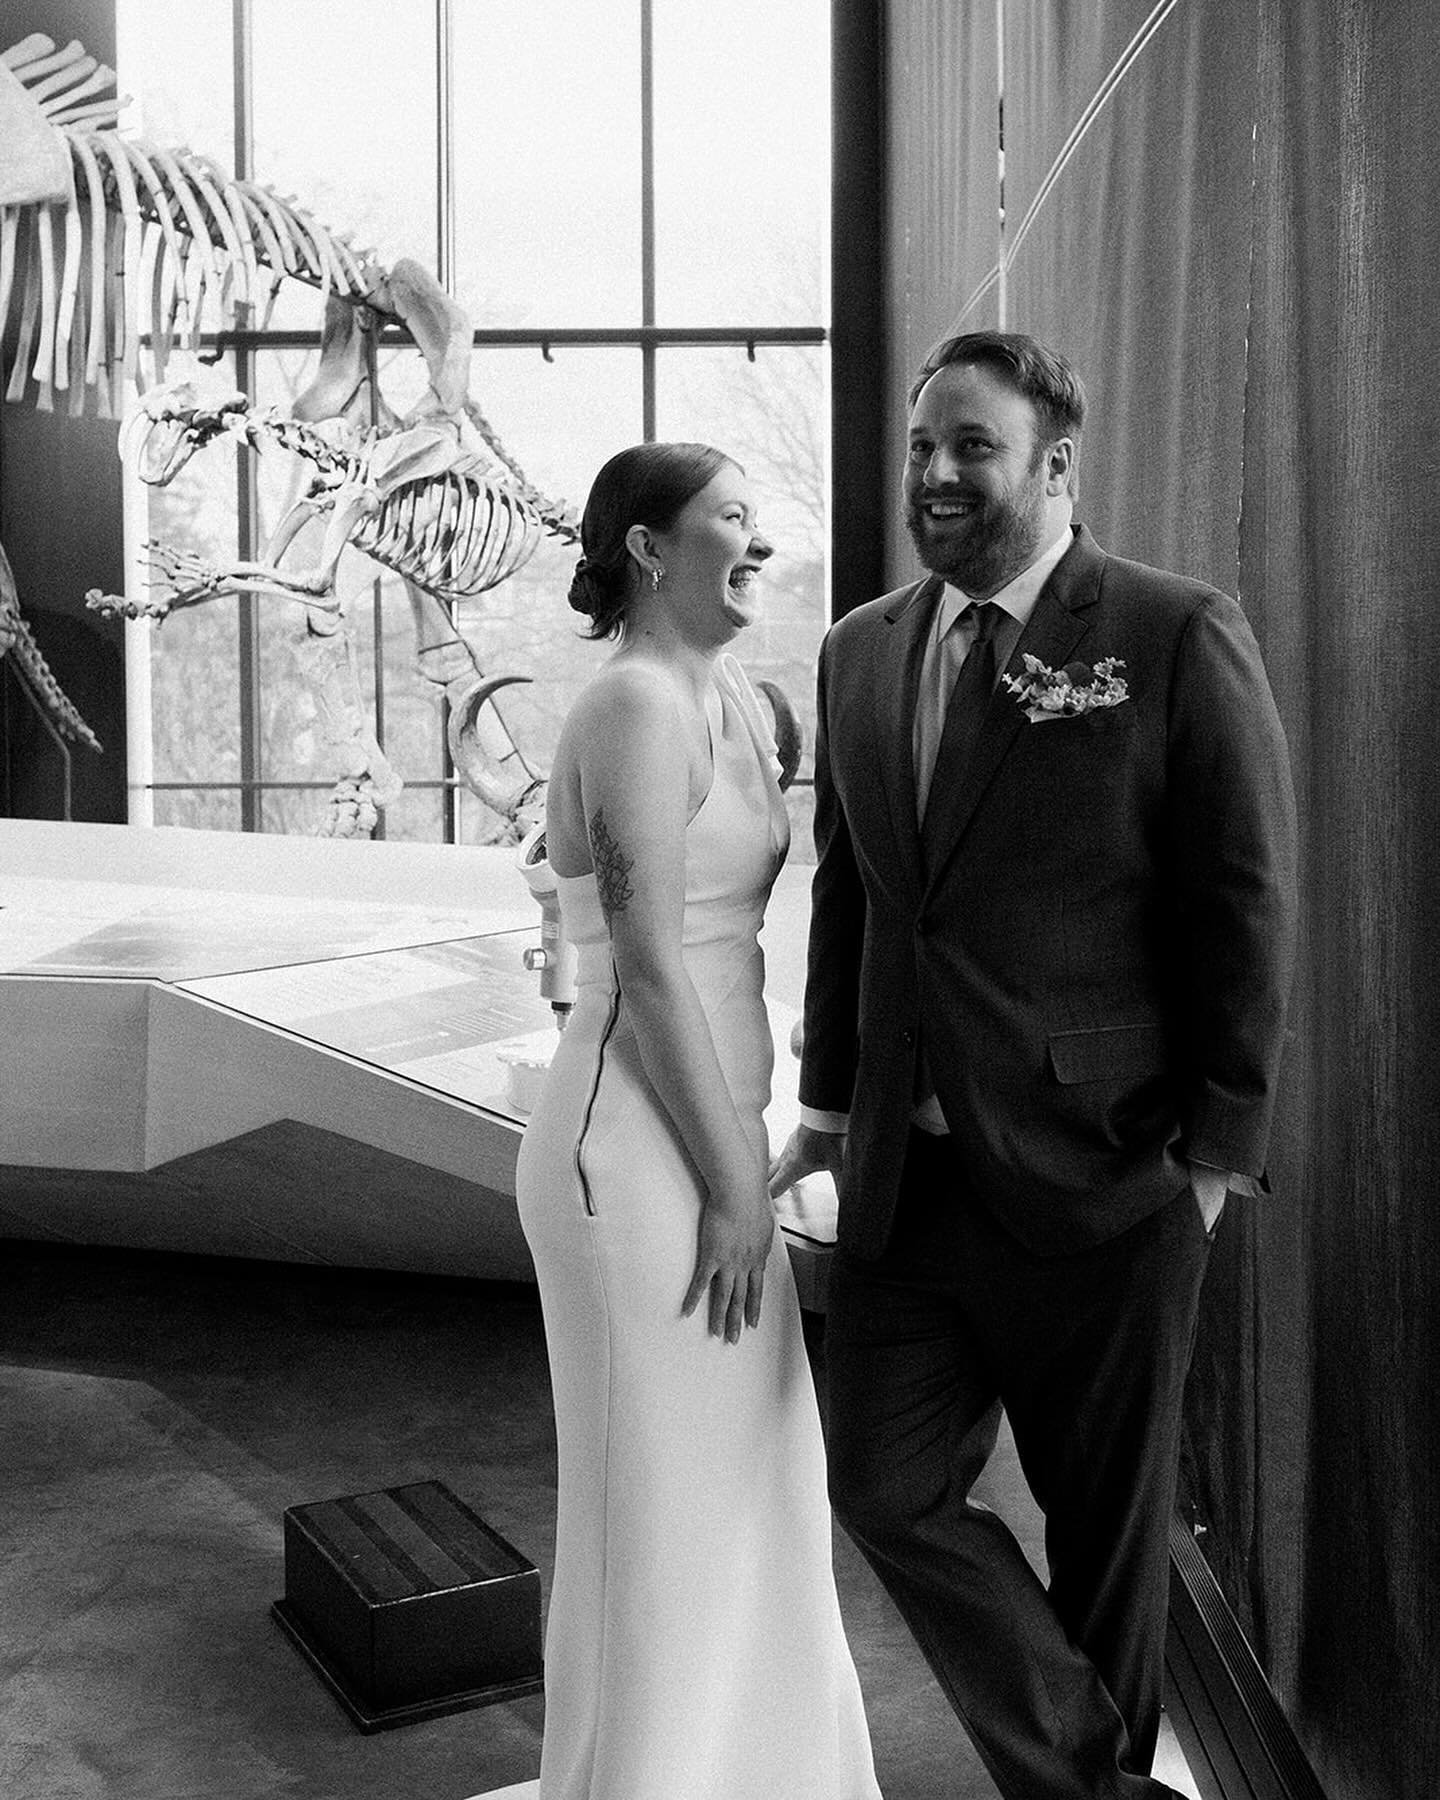 Congrats Susannah and Mike! Thank you for having me as your stylist, we had a great time getting you all ready.
Love all the smiles and the dinosaur bones 🦴 
Photos @thecardinals.co 
Planning @sageeventco 
Venue @burkemuseum